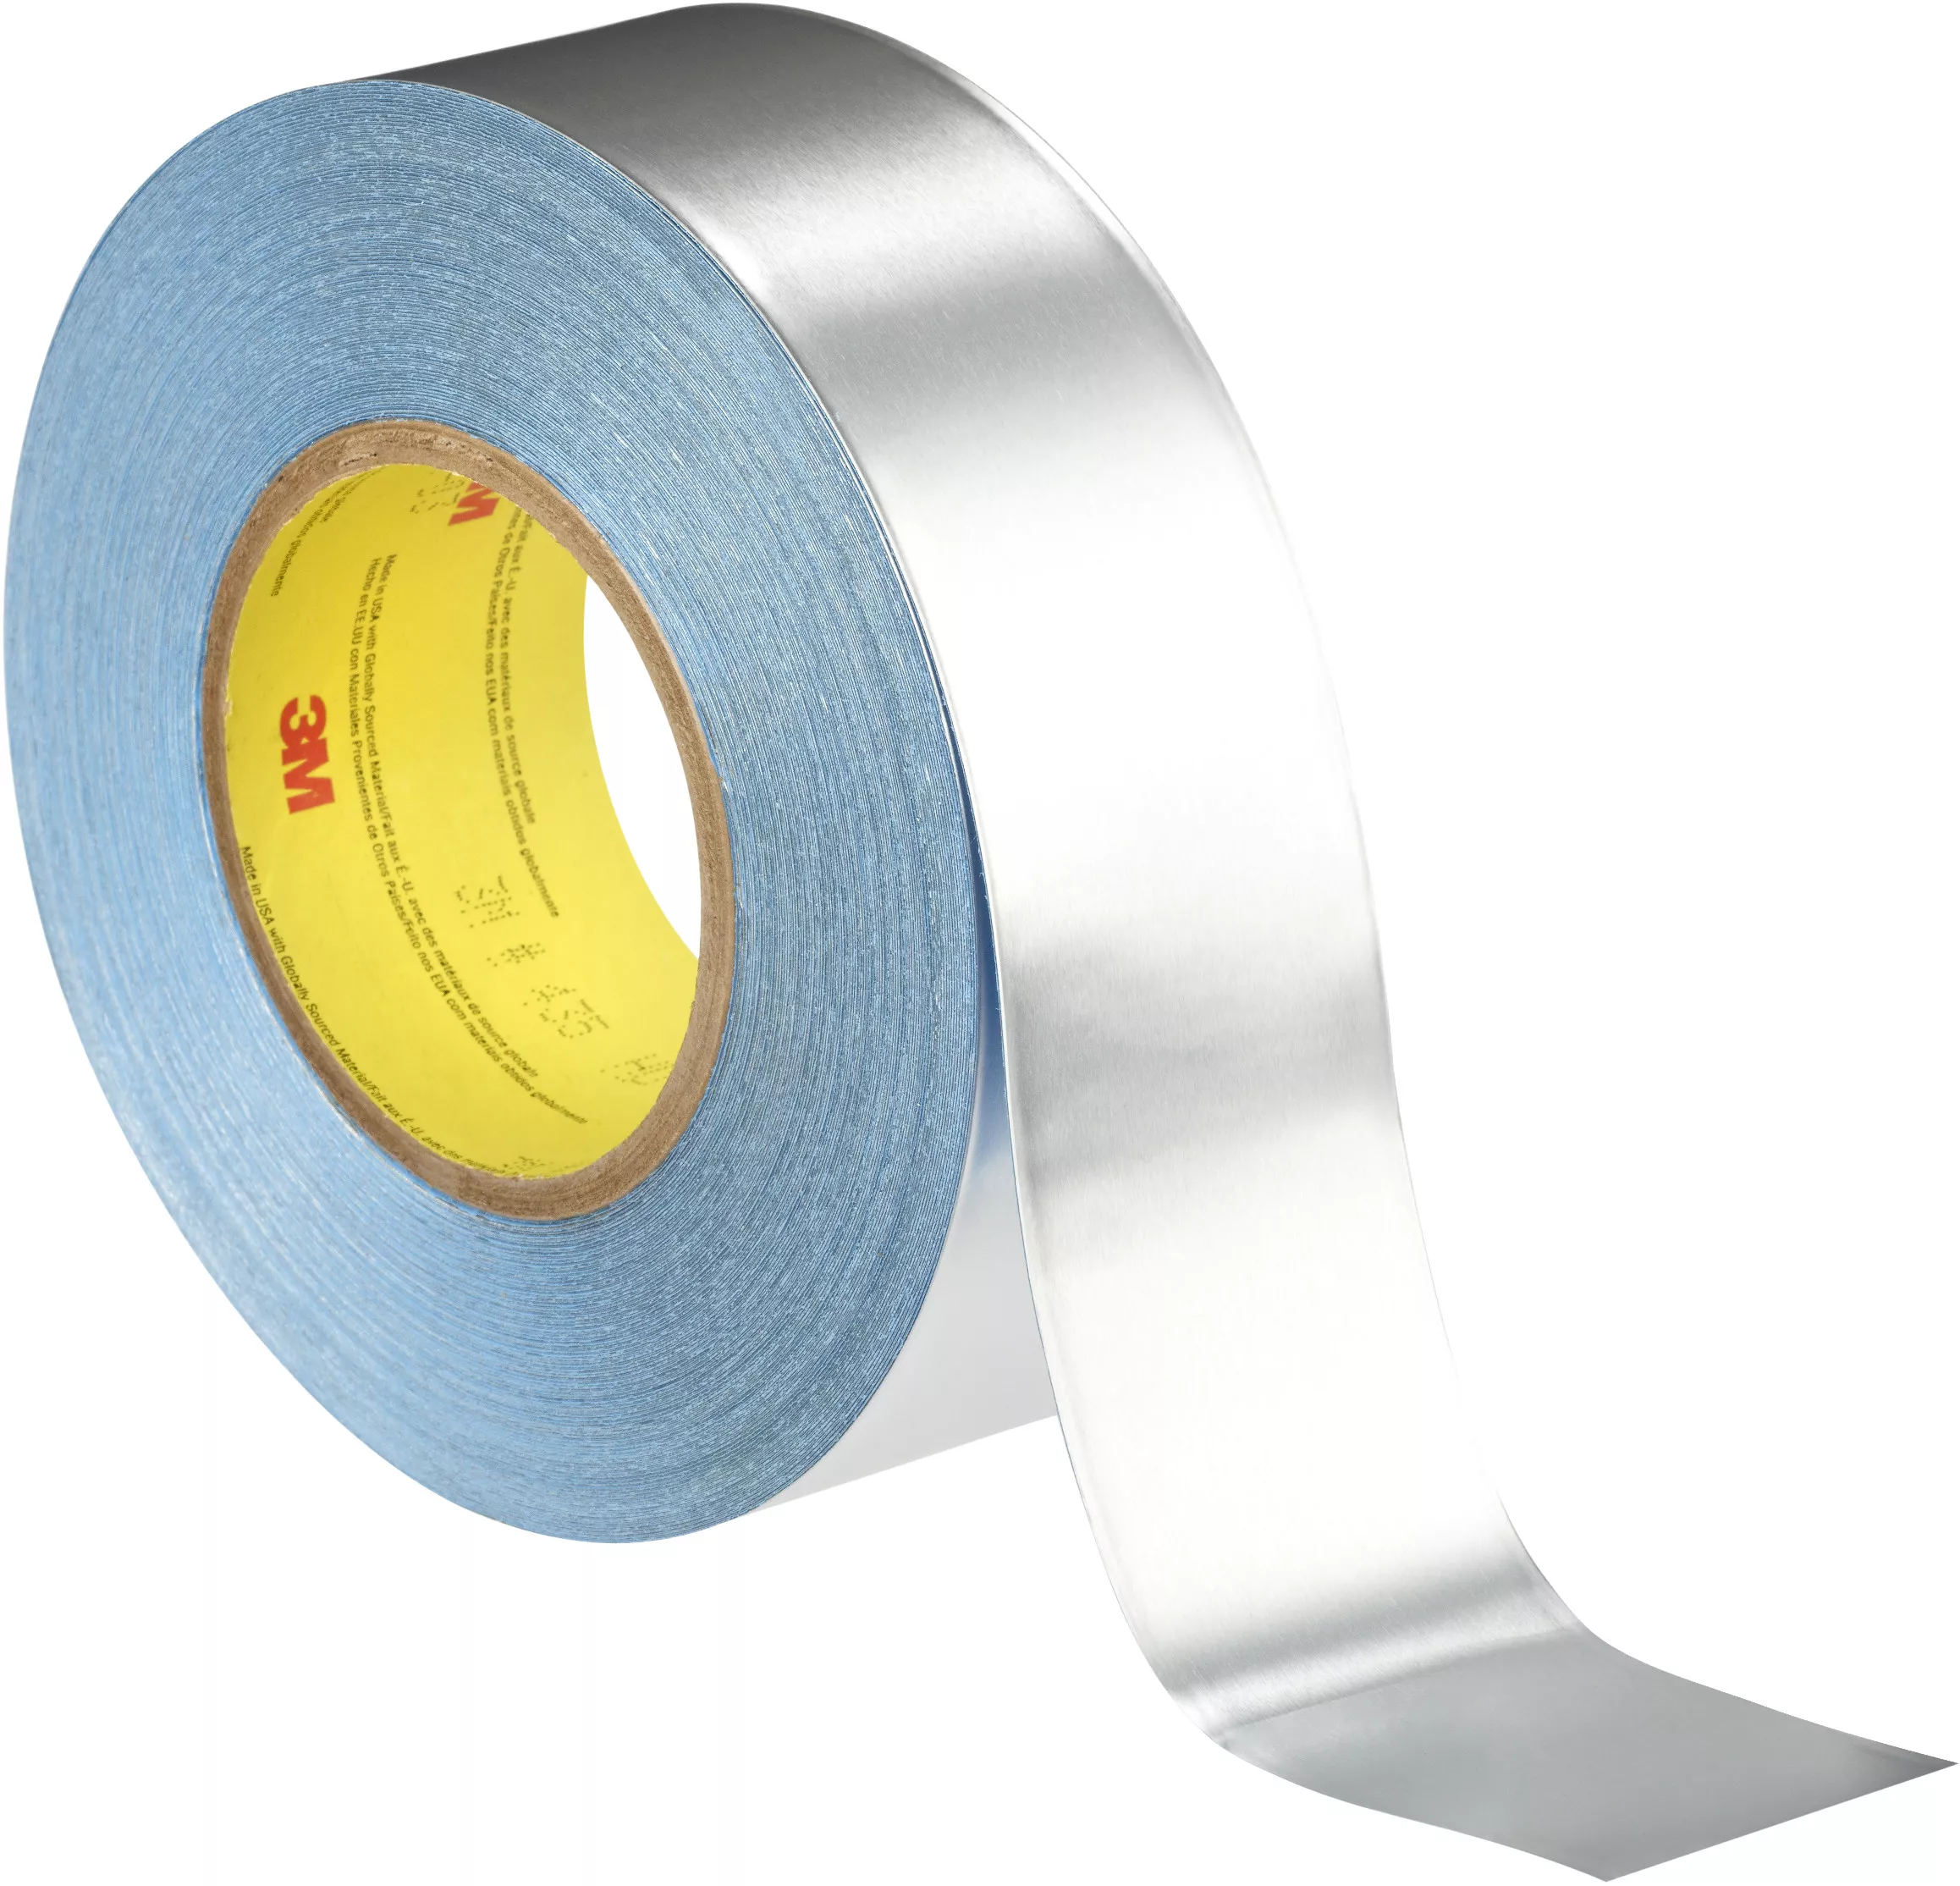 3M™ Vibration Damping Tape 435, Silver, 2 in x 36 yd, 13.5 mil, 6
Roll/Case